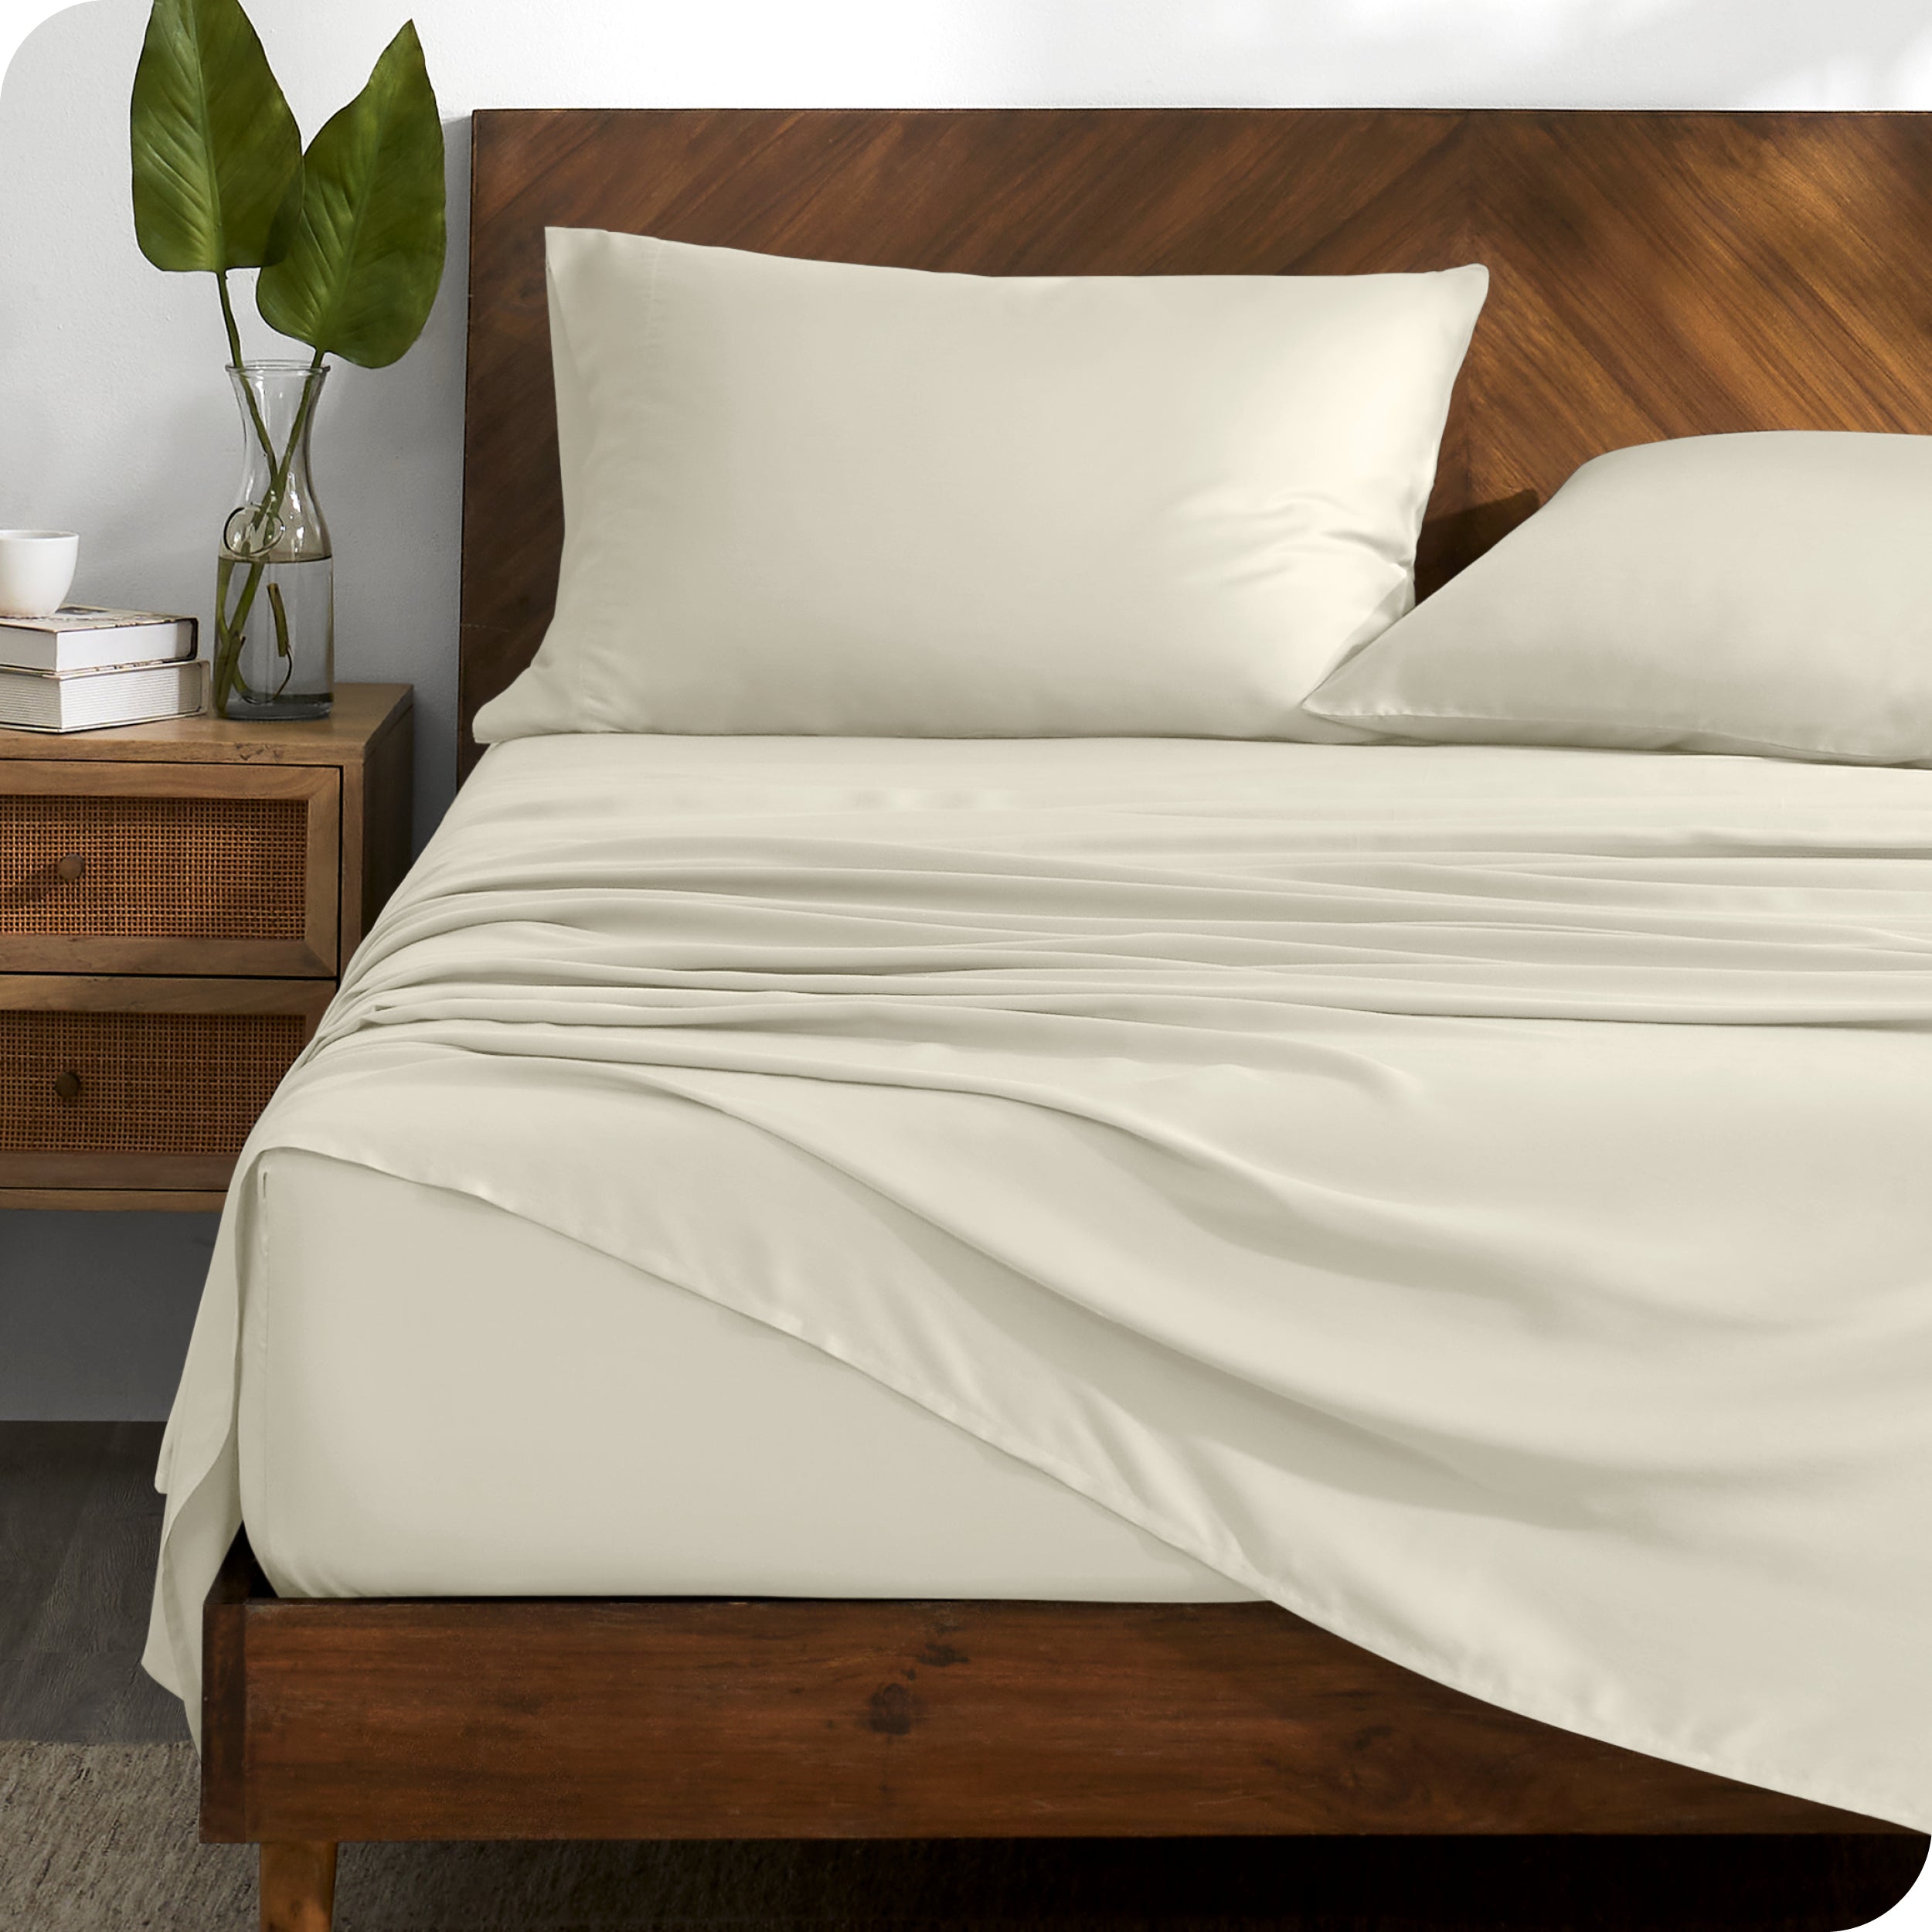 TENCEL™ sheet set on a bed with the flat sheet loosely draped over the top. The mattress is on a wooden bed frame.